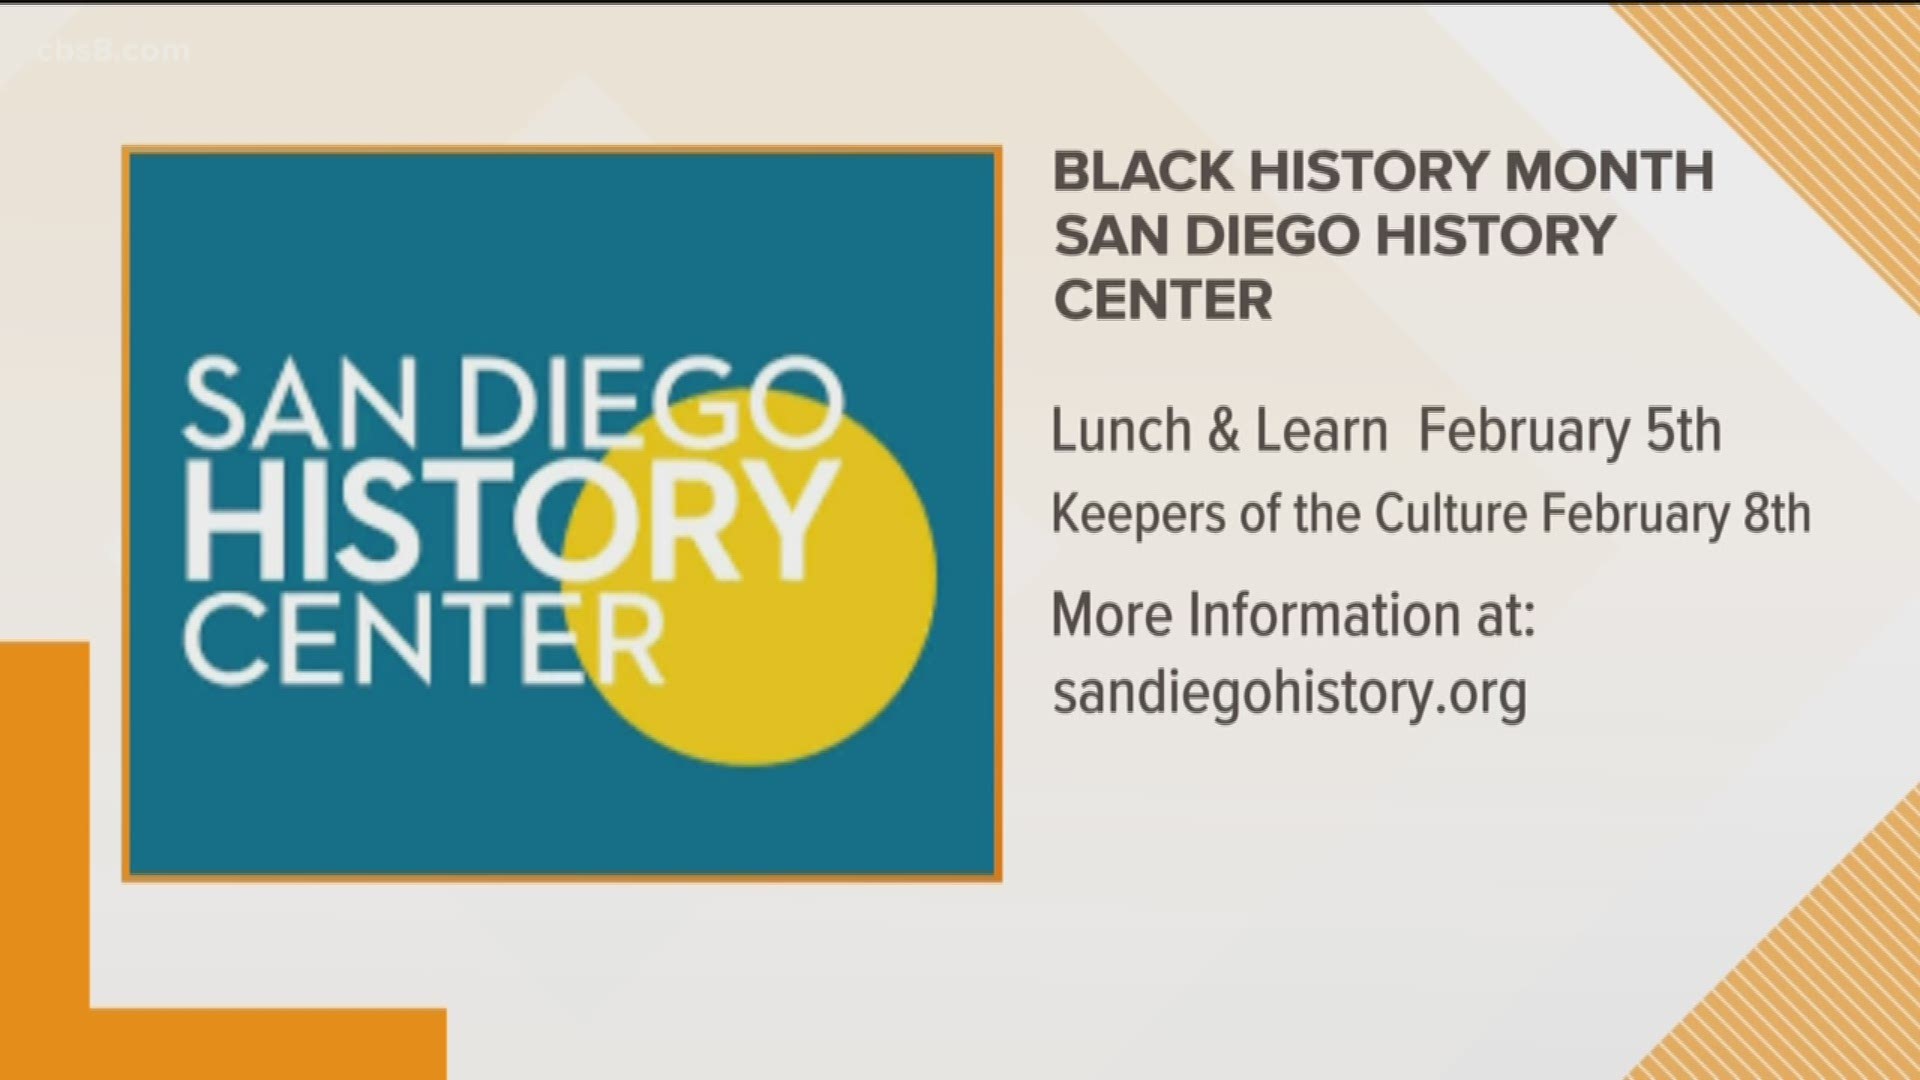 The scanning event is to gather historical documents and photos to fill in the gaps of San Diego’s African American history in San Diego on Feb. 8 at 4 p.m.